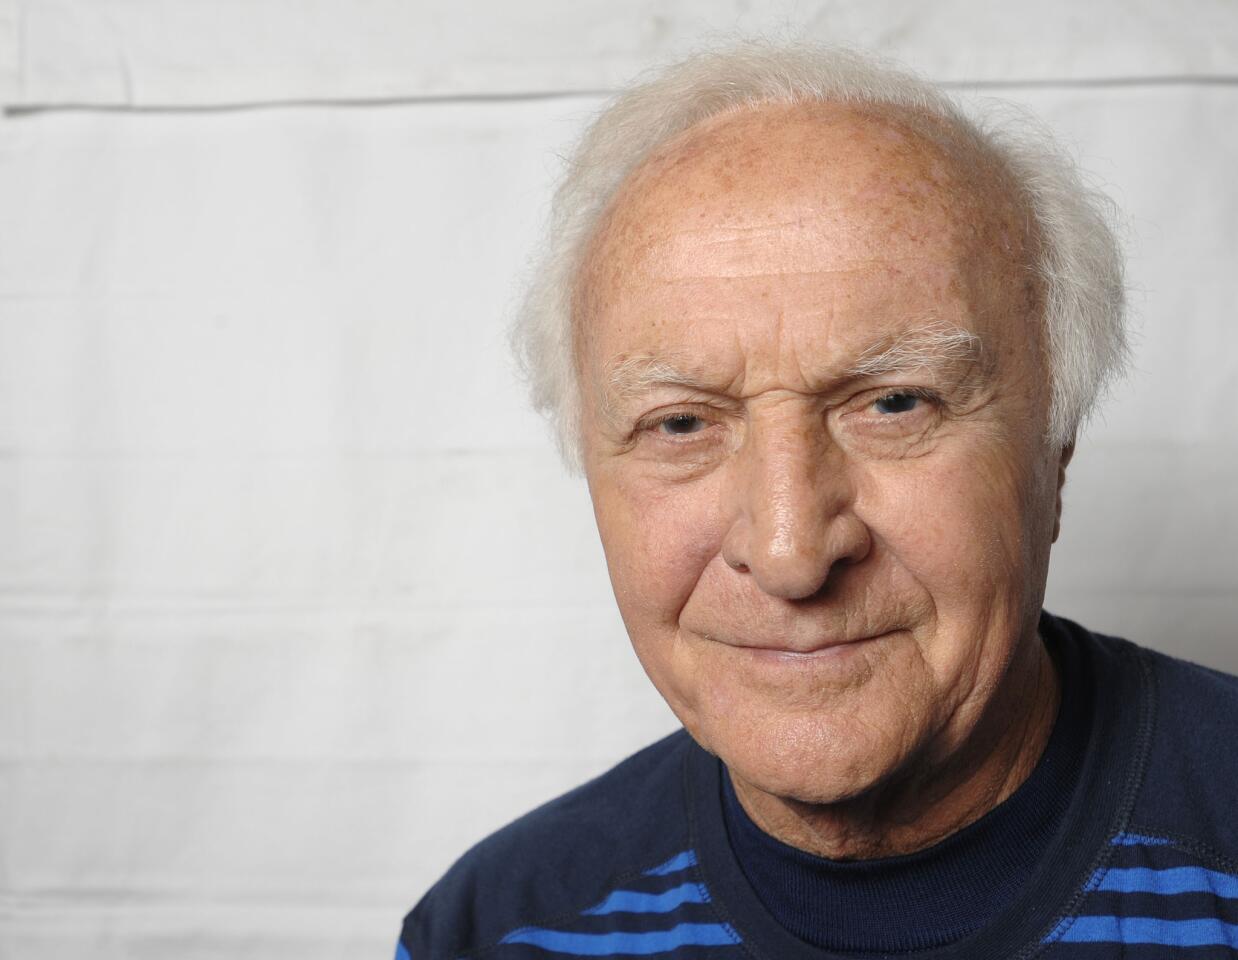 Robert Loggia poses for a portrait Jan. 22, 2009, during the Sundance Film Festival in Park City, Utah. Loggia, who played drug lords and mobsters and danced with Tom Hanks in "Big," has died at age 85.